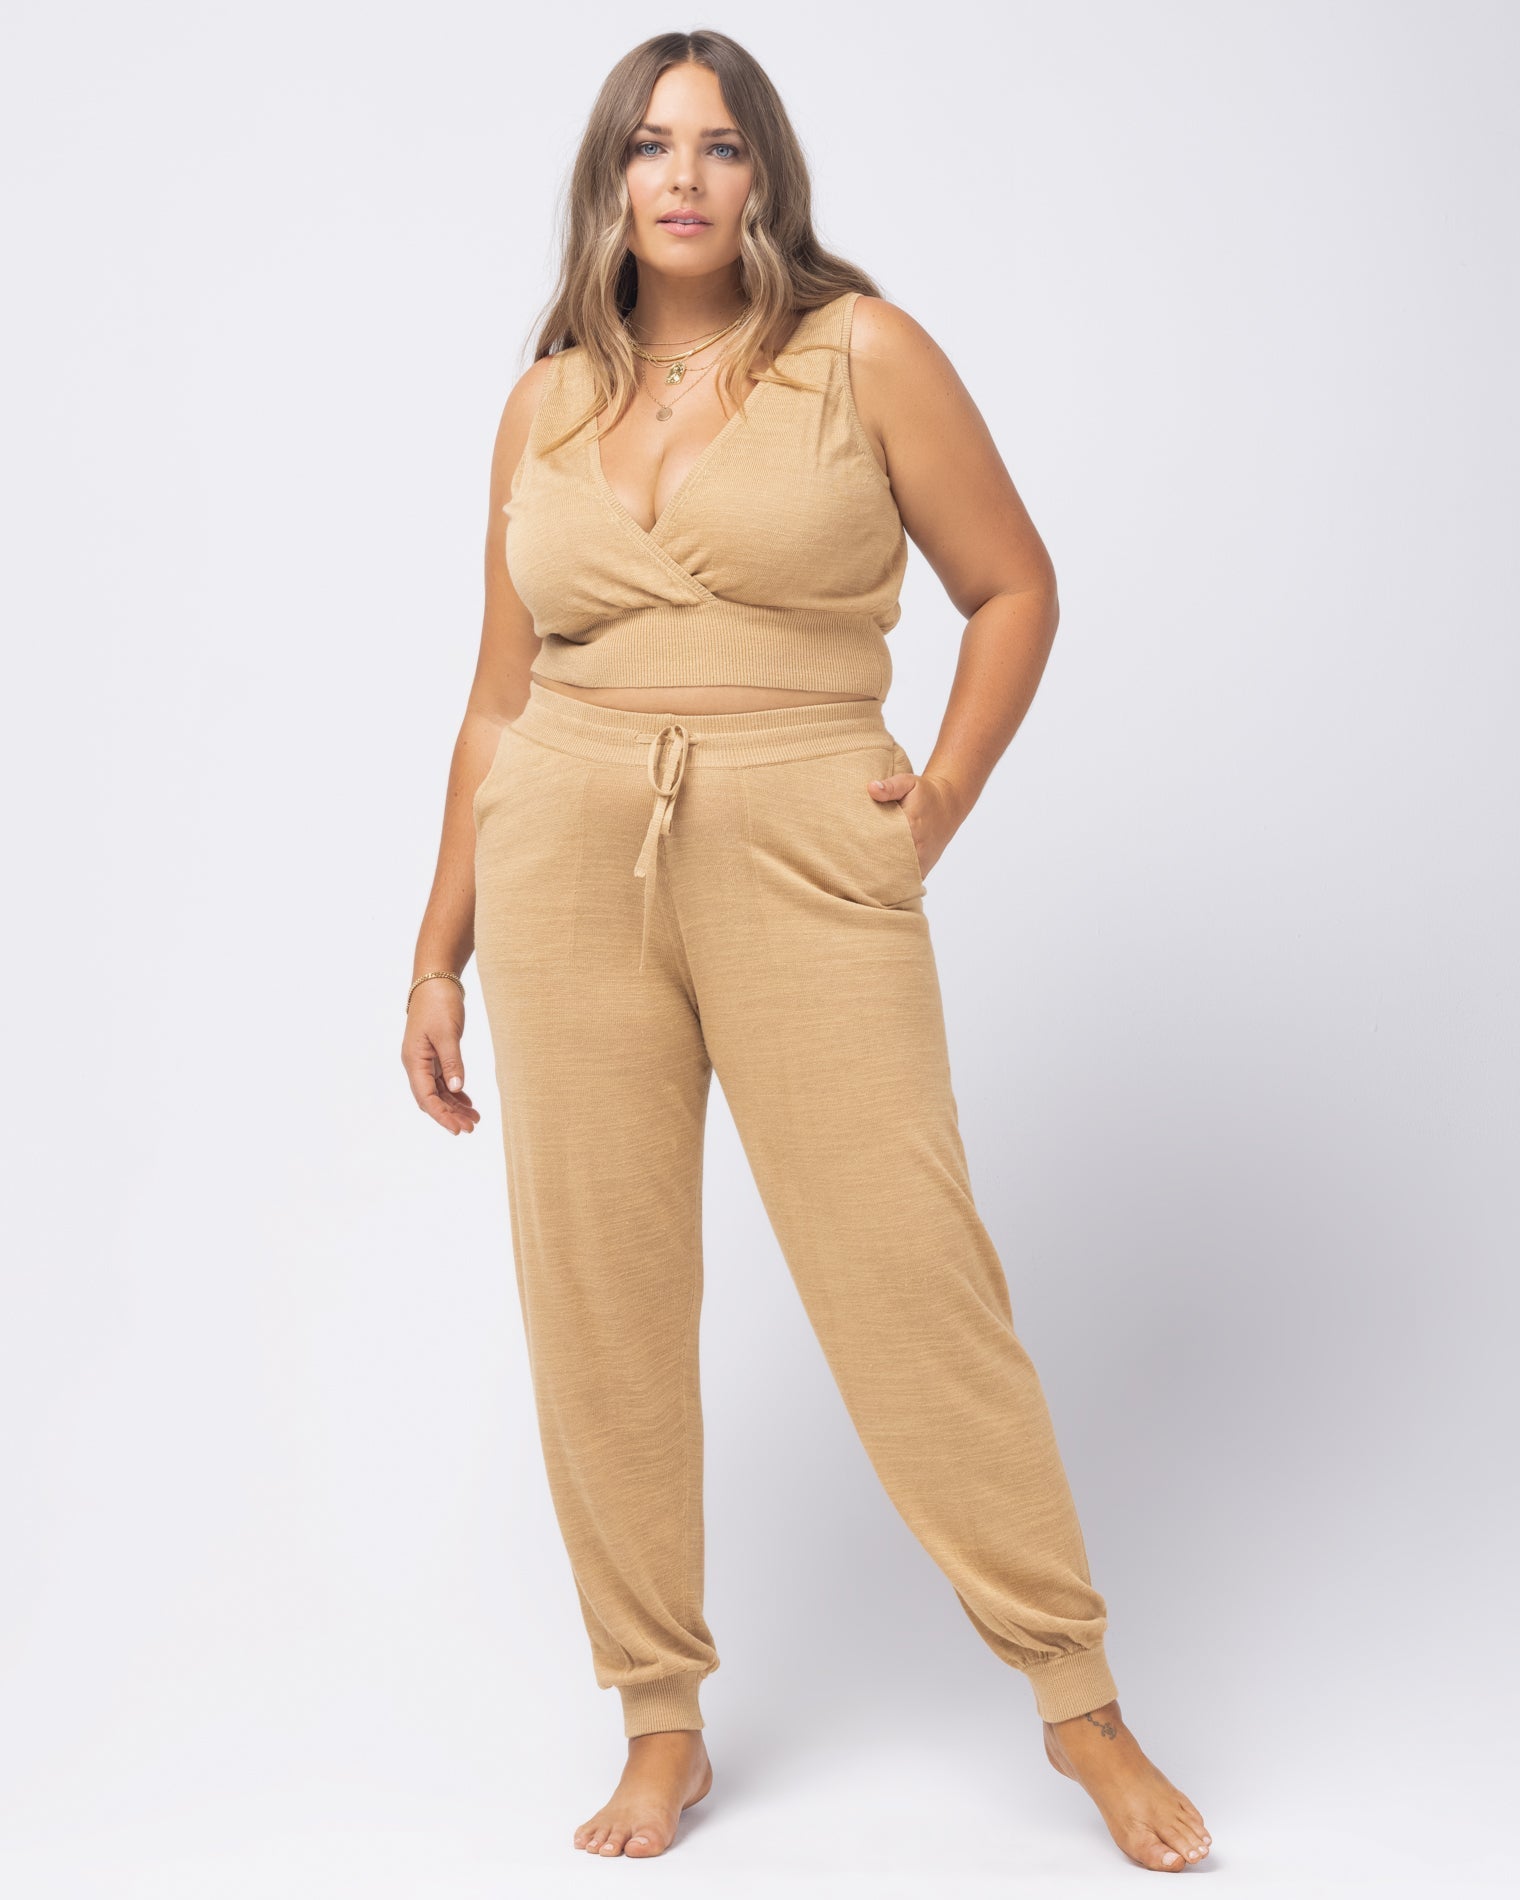 Azores Top Toffee | Model: Ali (size: XL)